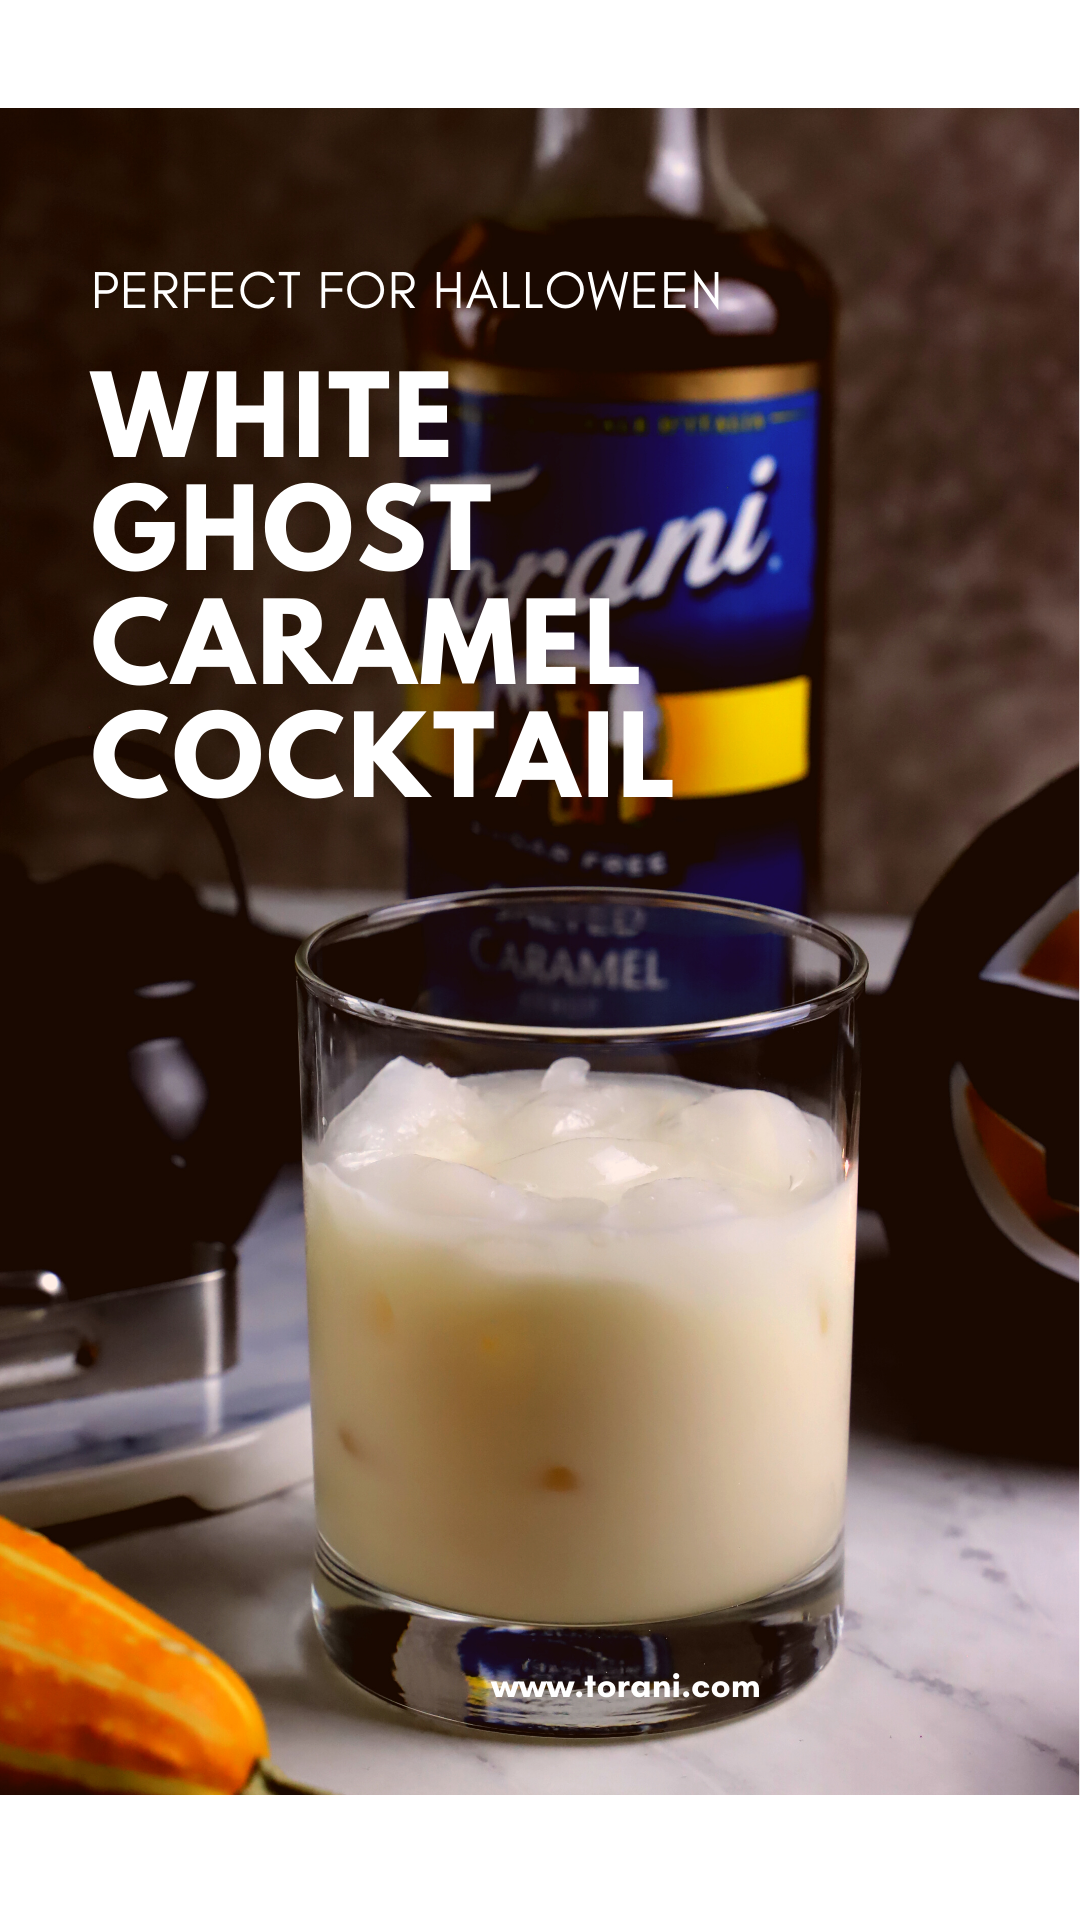 White Ghost Caramel cocktail